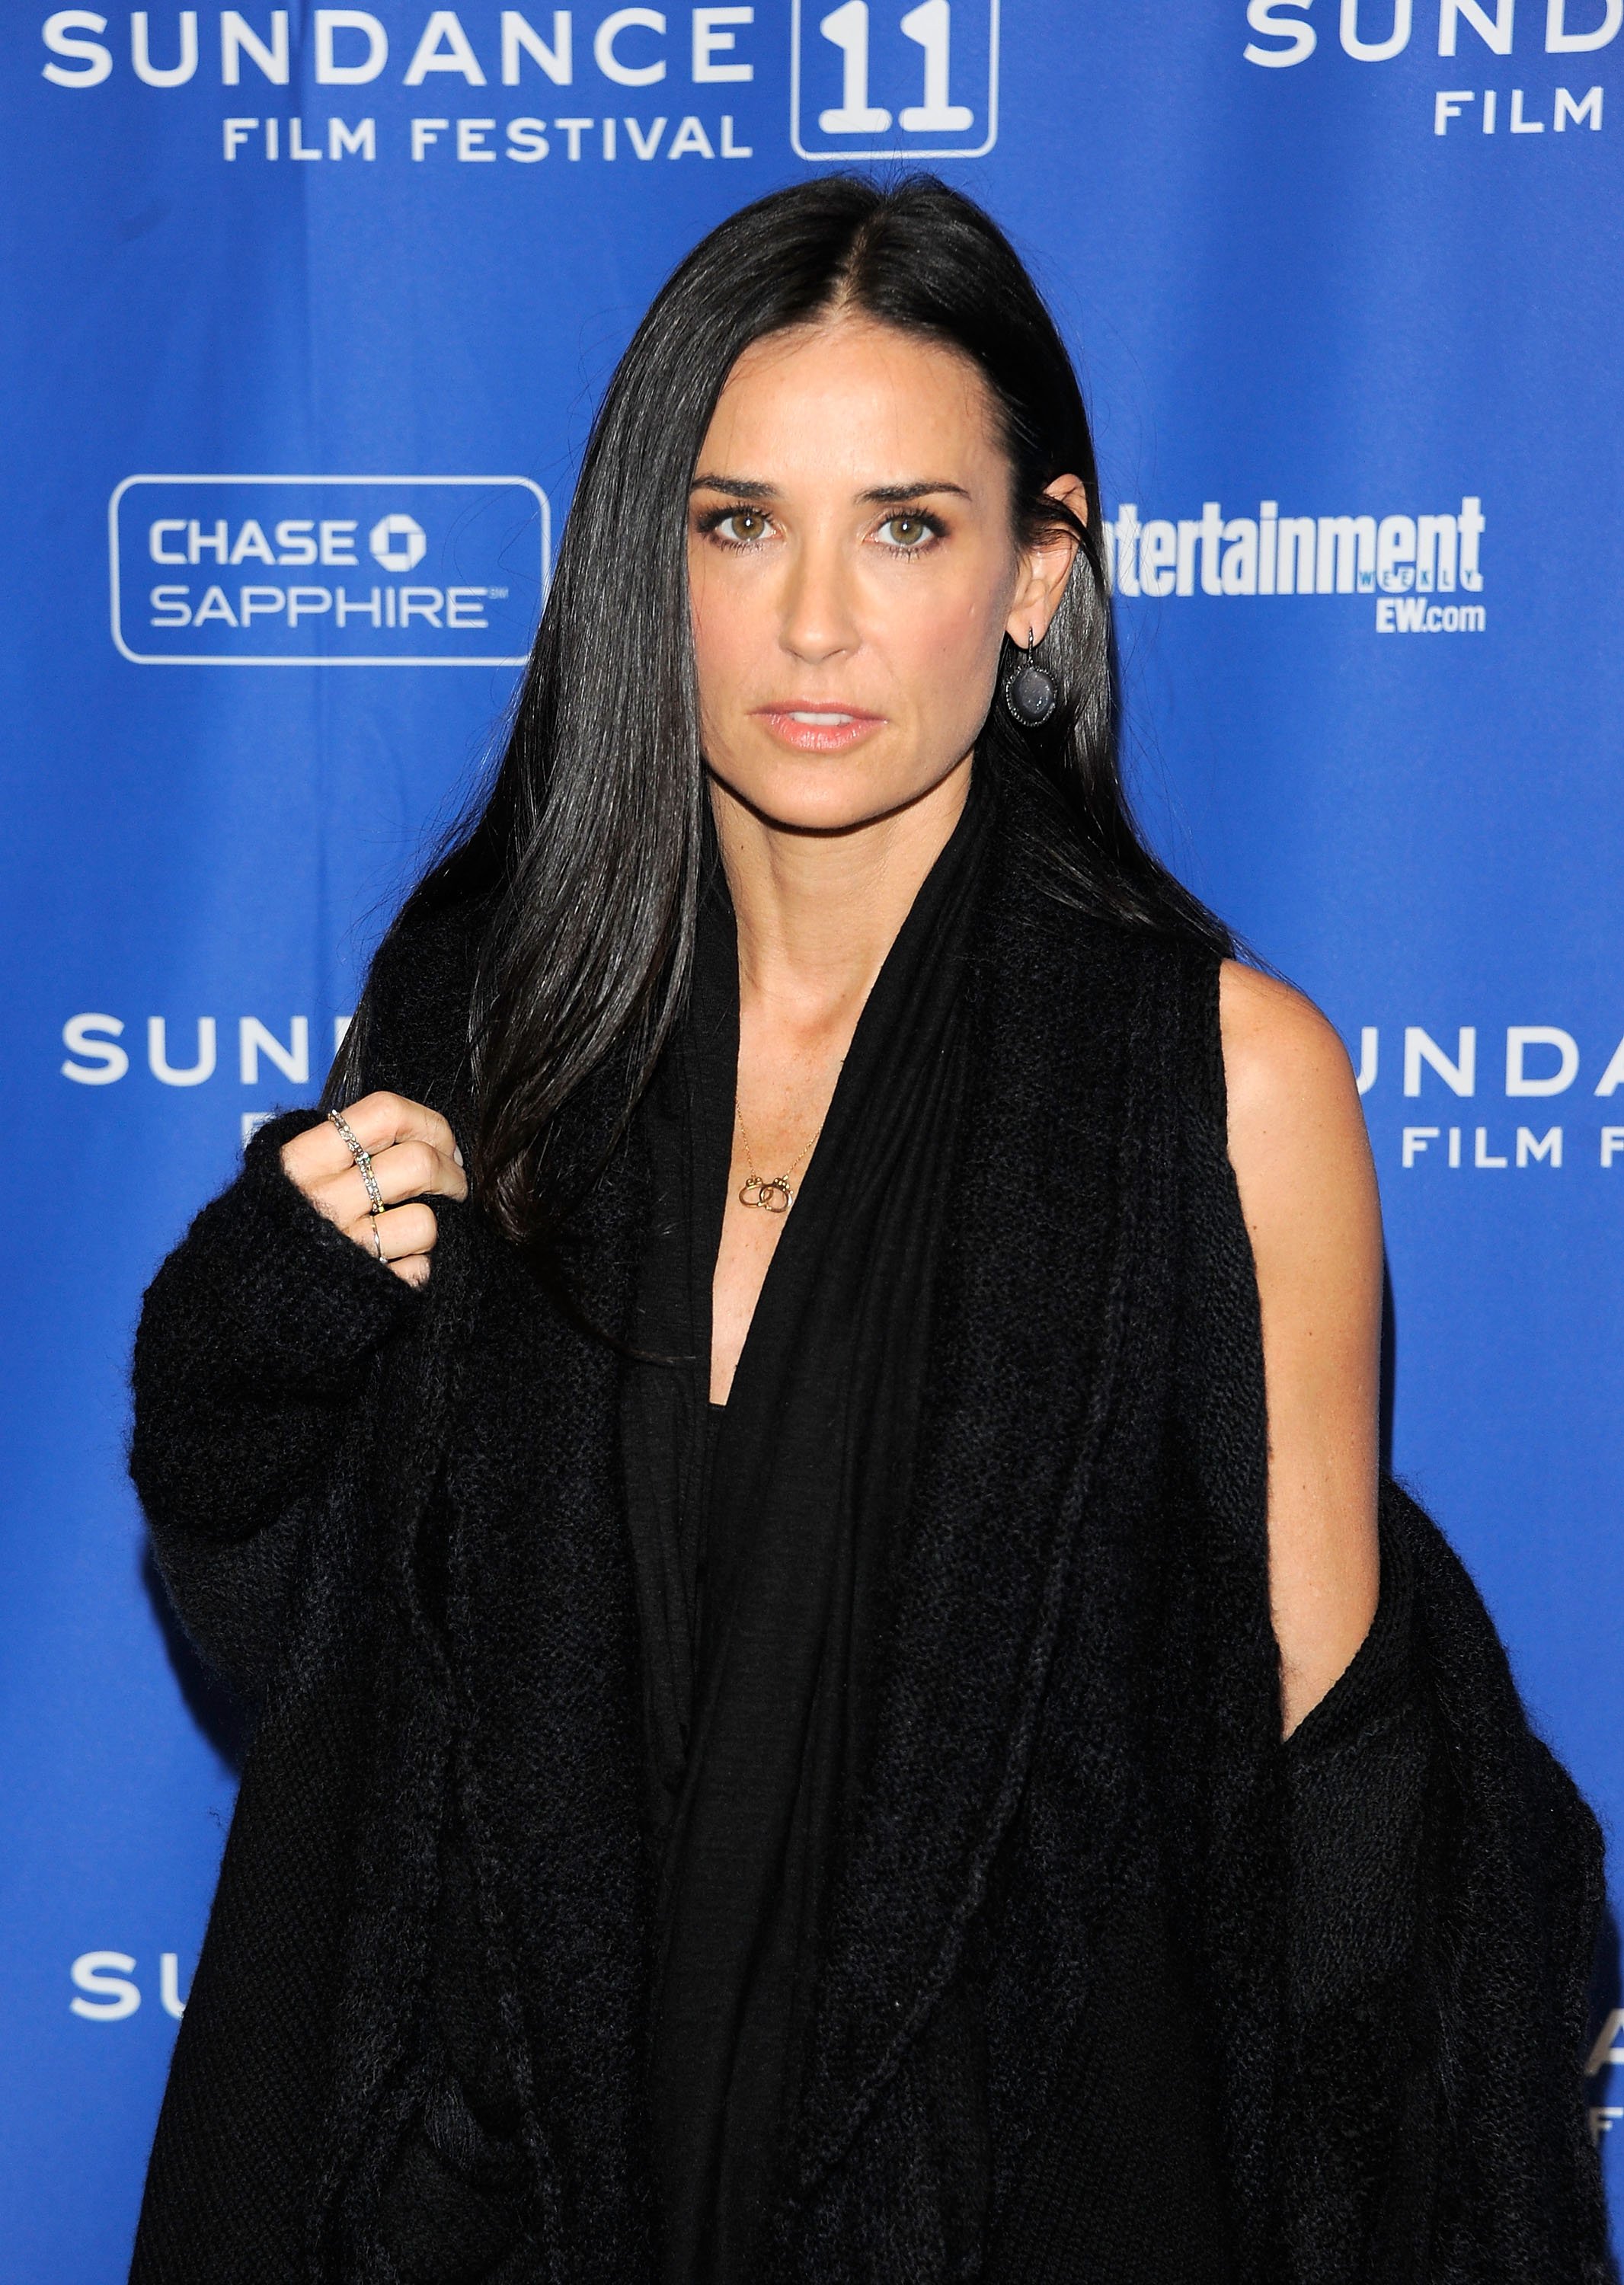 Actress Demi Moore during the 2011 premier of "Die Another Day" at the Eccles Center Theatre in Utah. | Photo: Getty Images